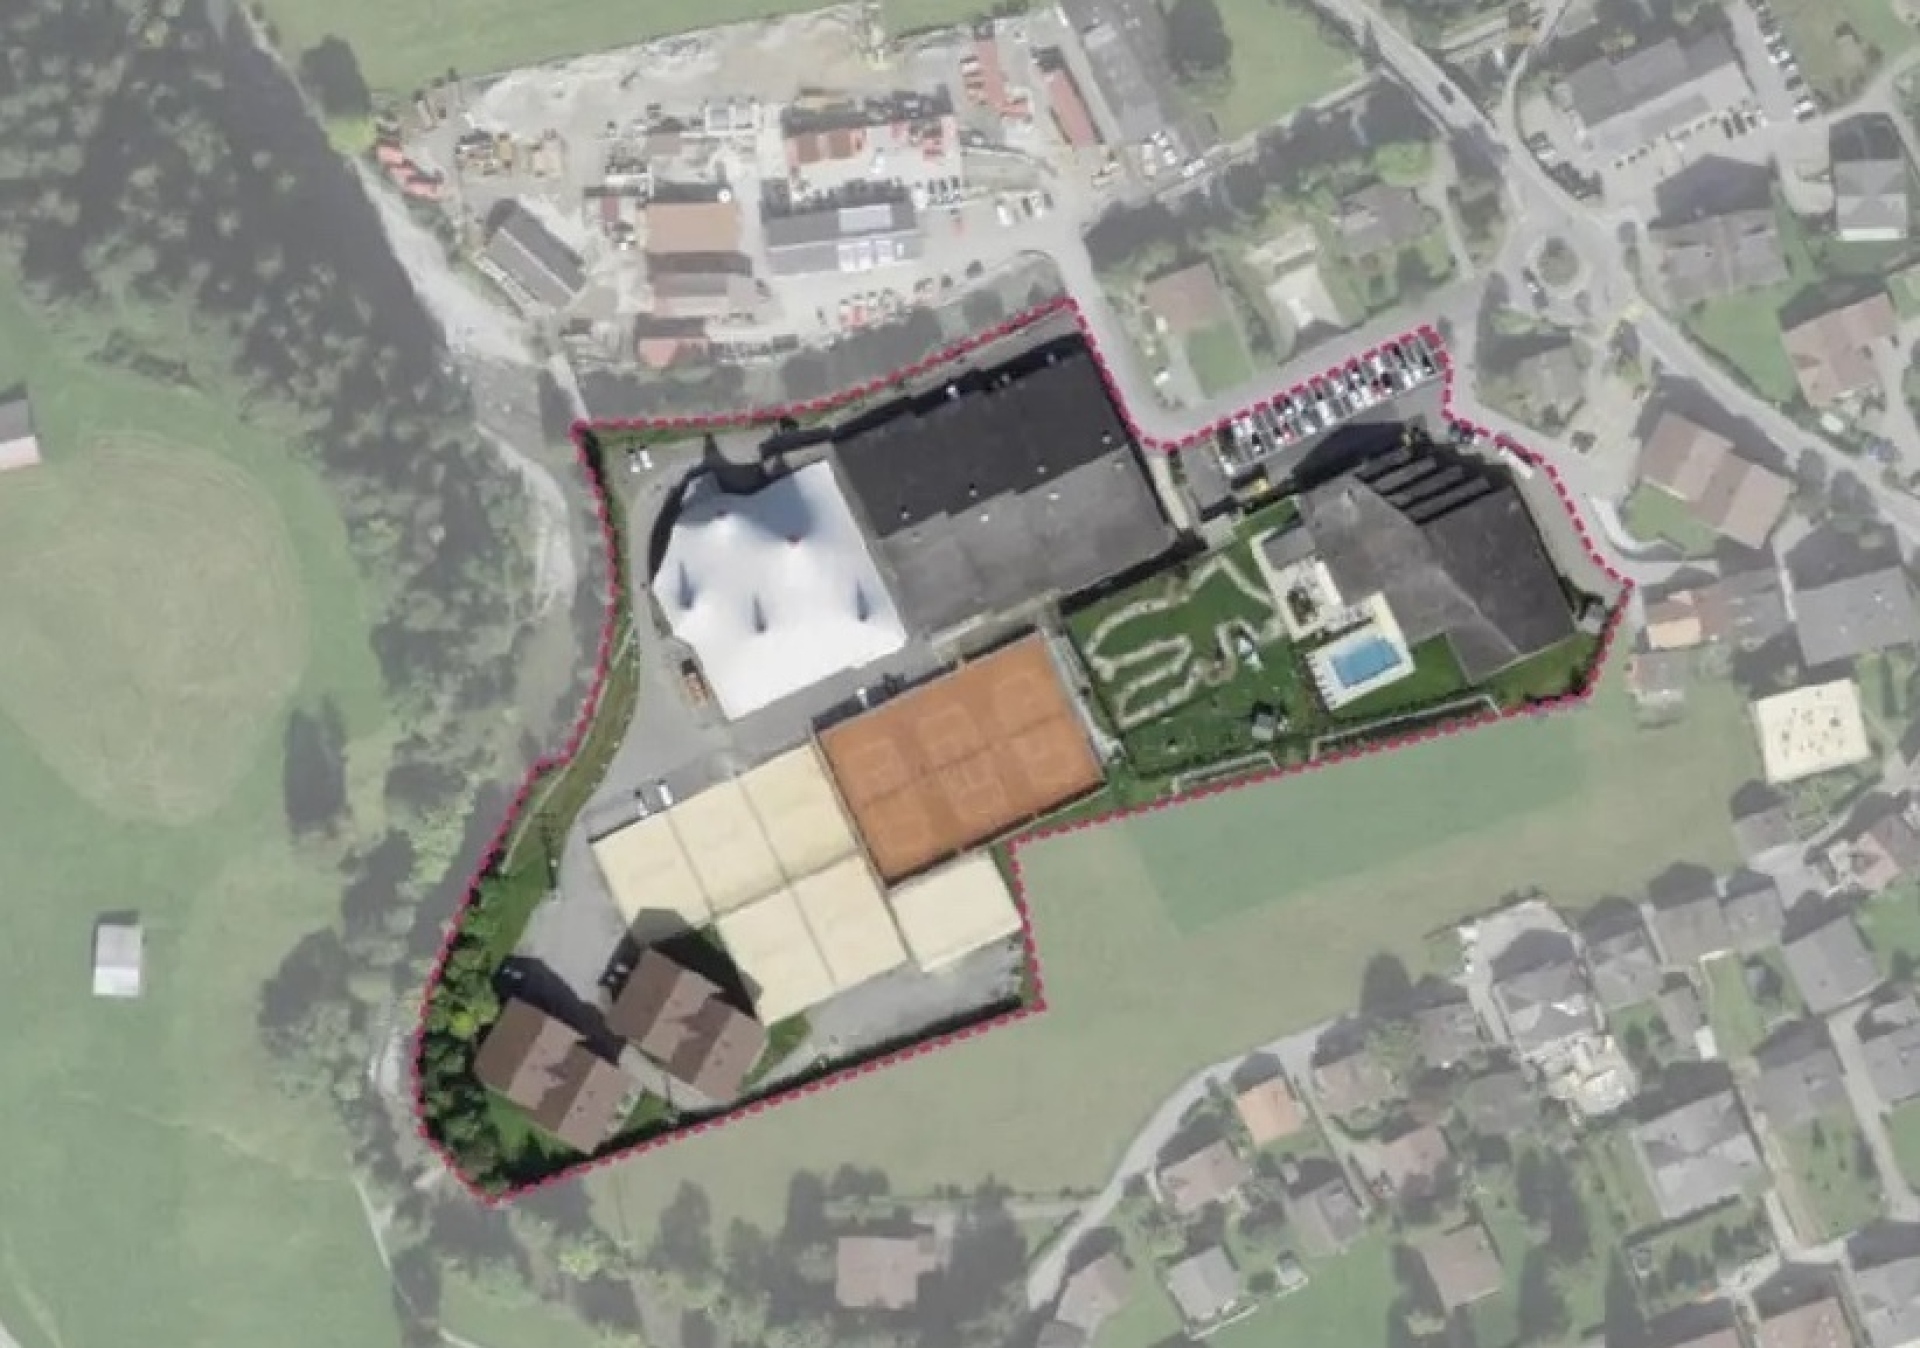 The red outline shows the perimeter of the site. It is currently occupied by multi-purpose buildings and premises for sport and leisure as well as temporary cultural buildings. The white tent shape is clearly recognisable.